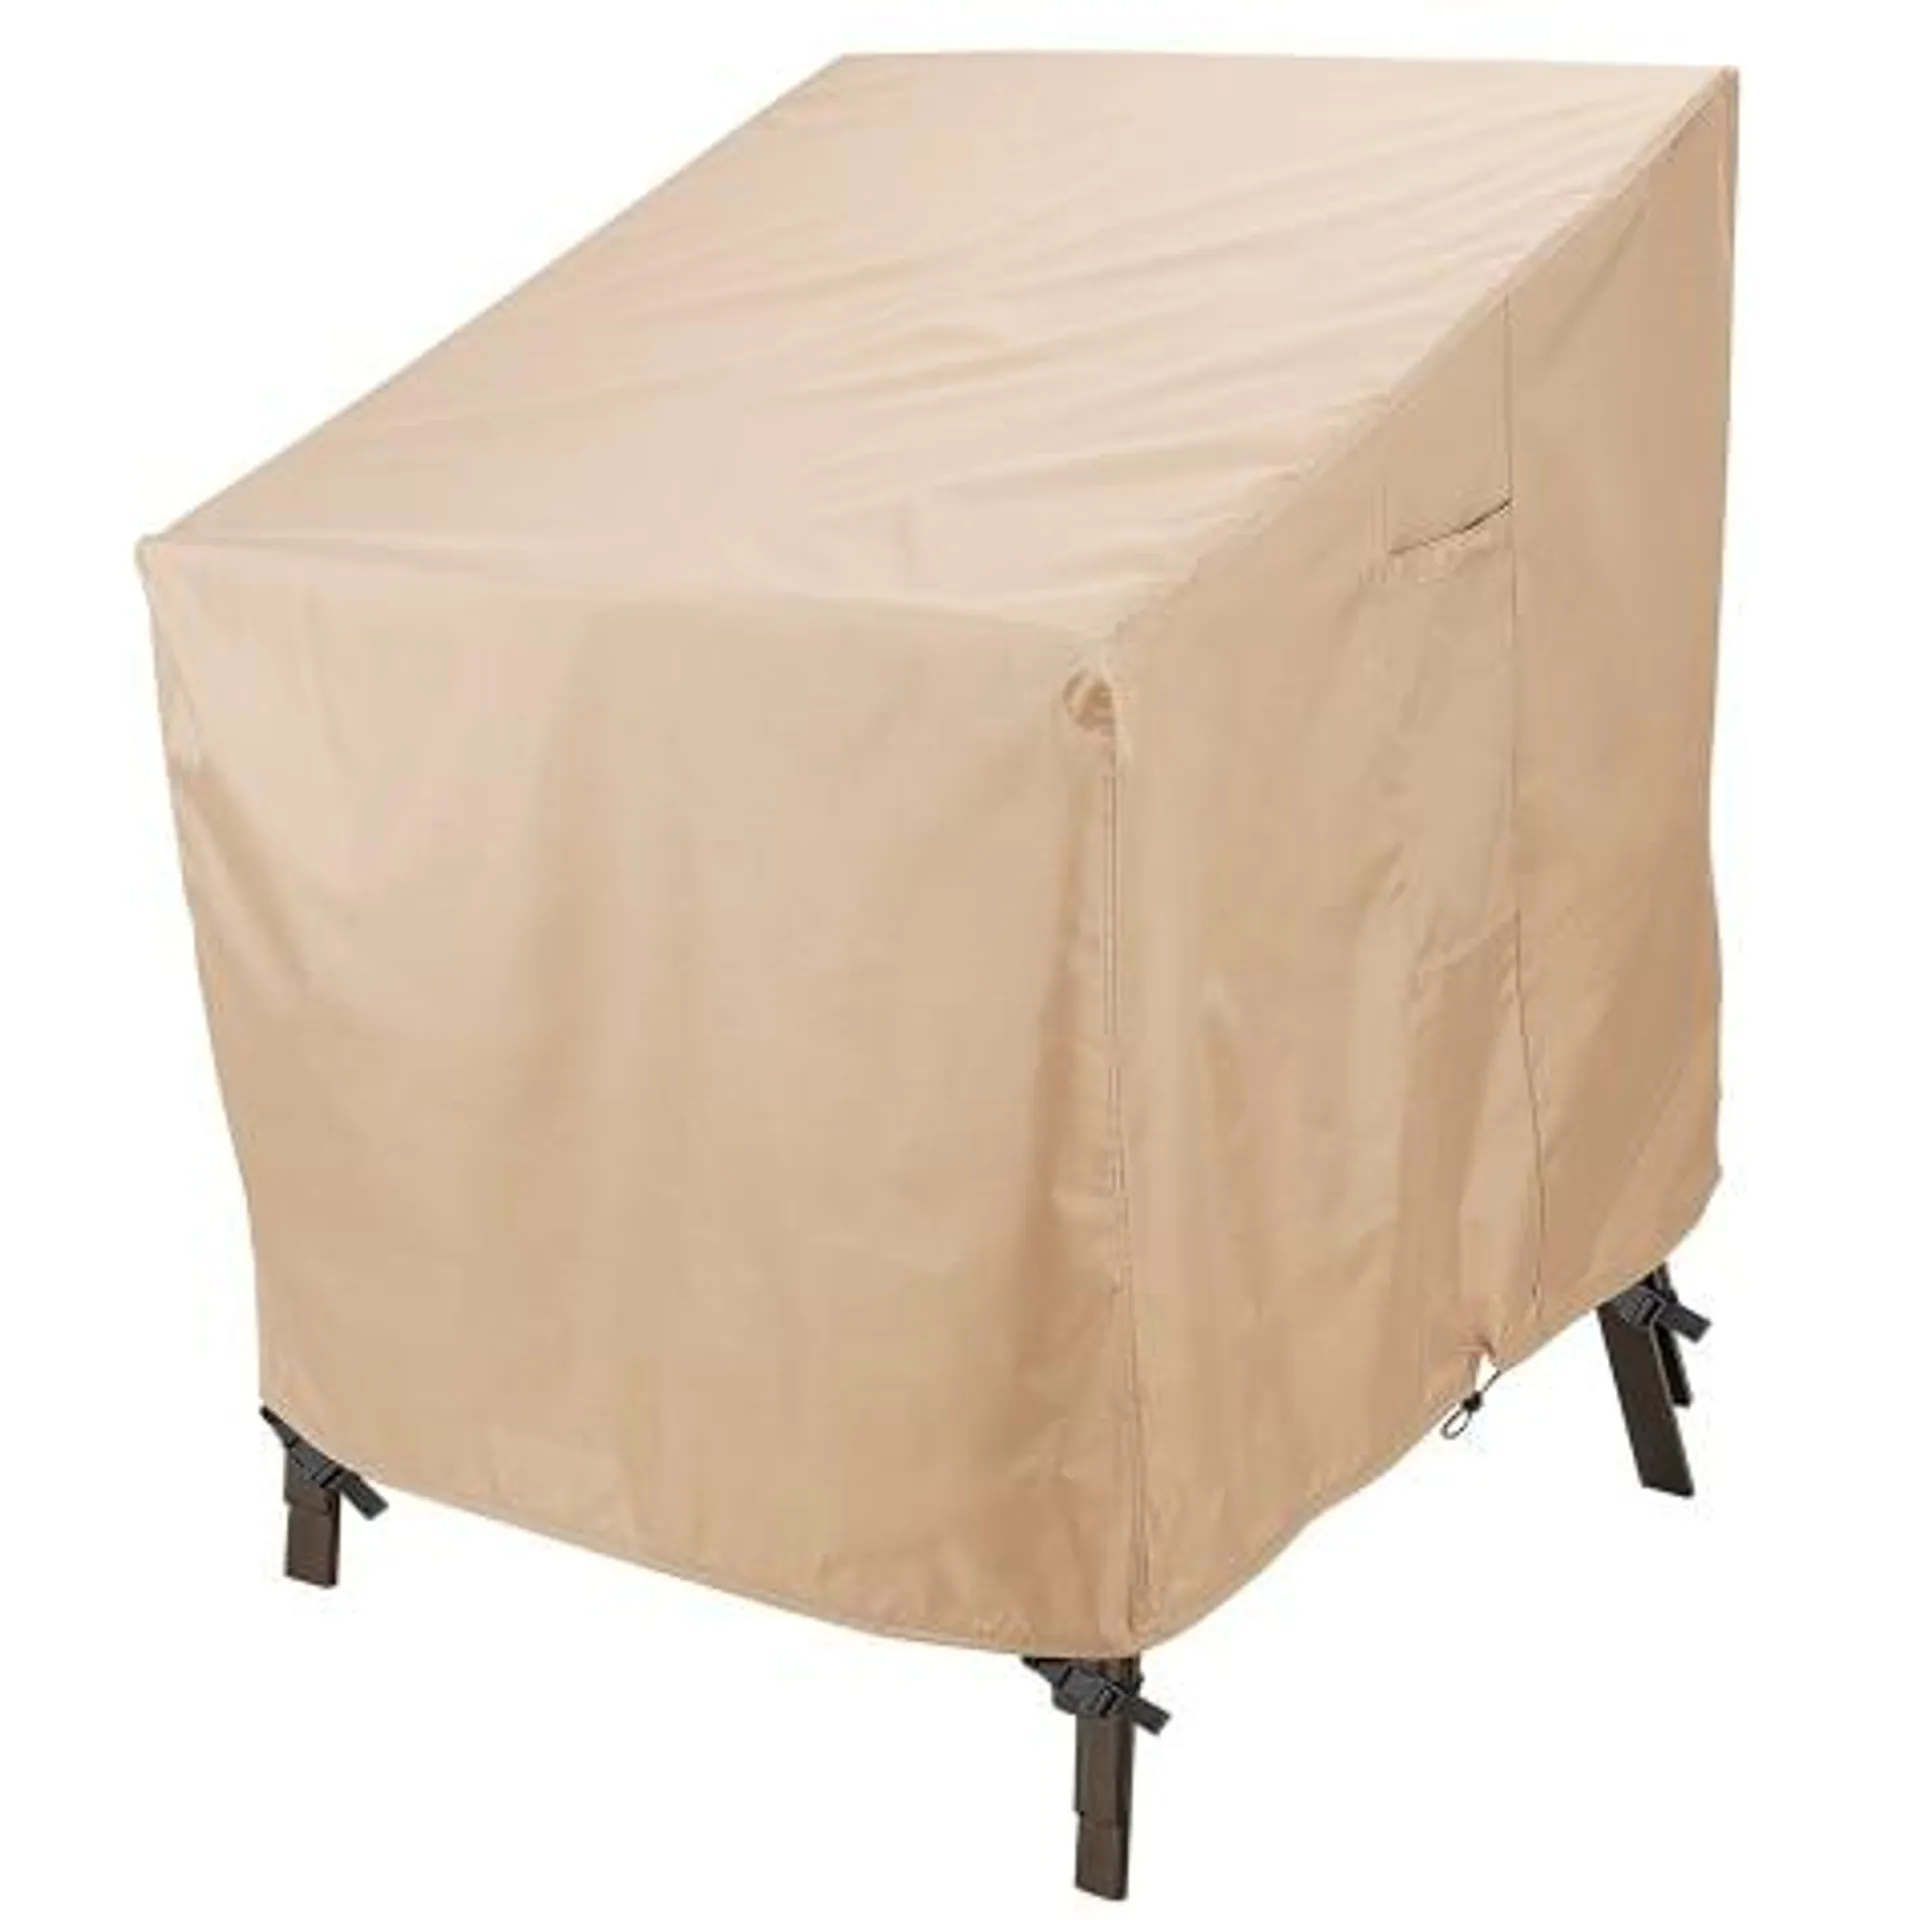 Outdoor Living Accents Elite Series Chair Cover